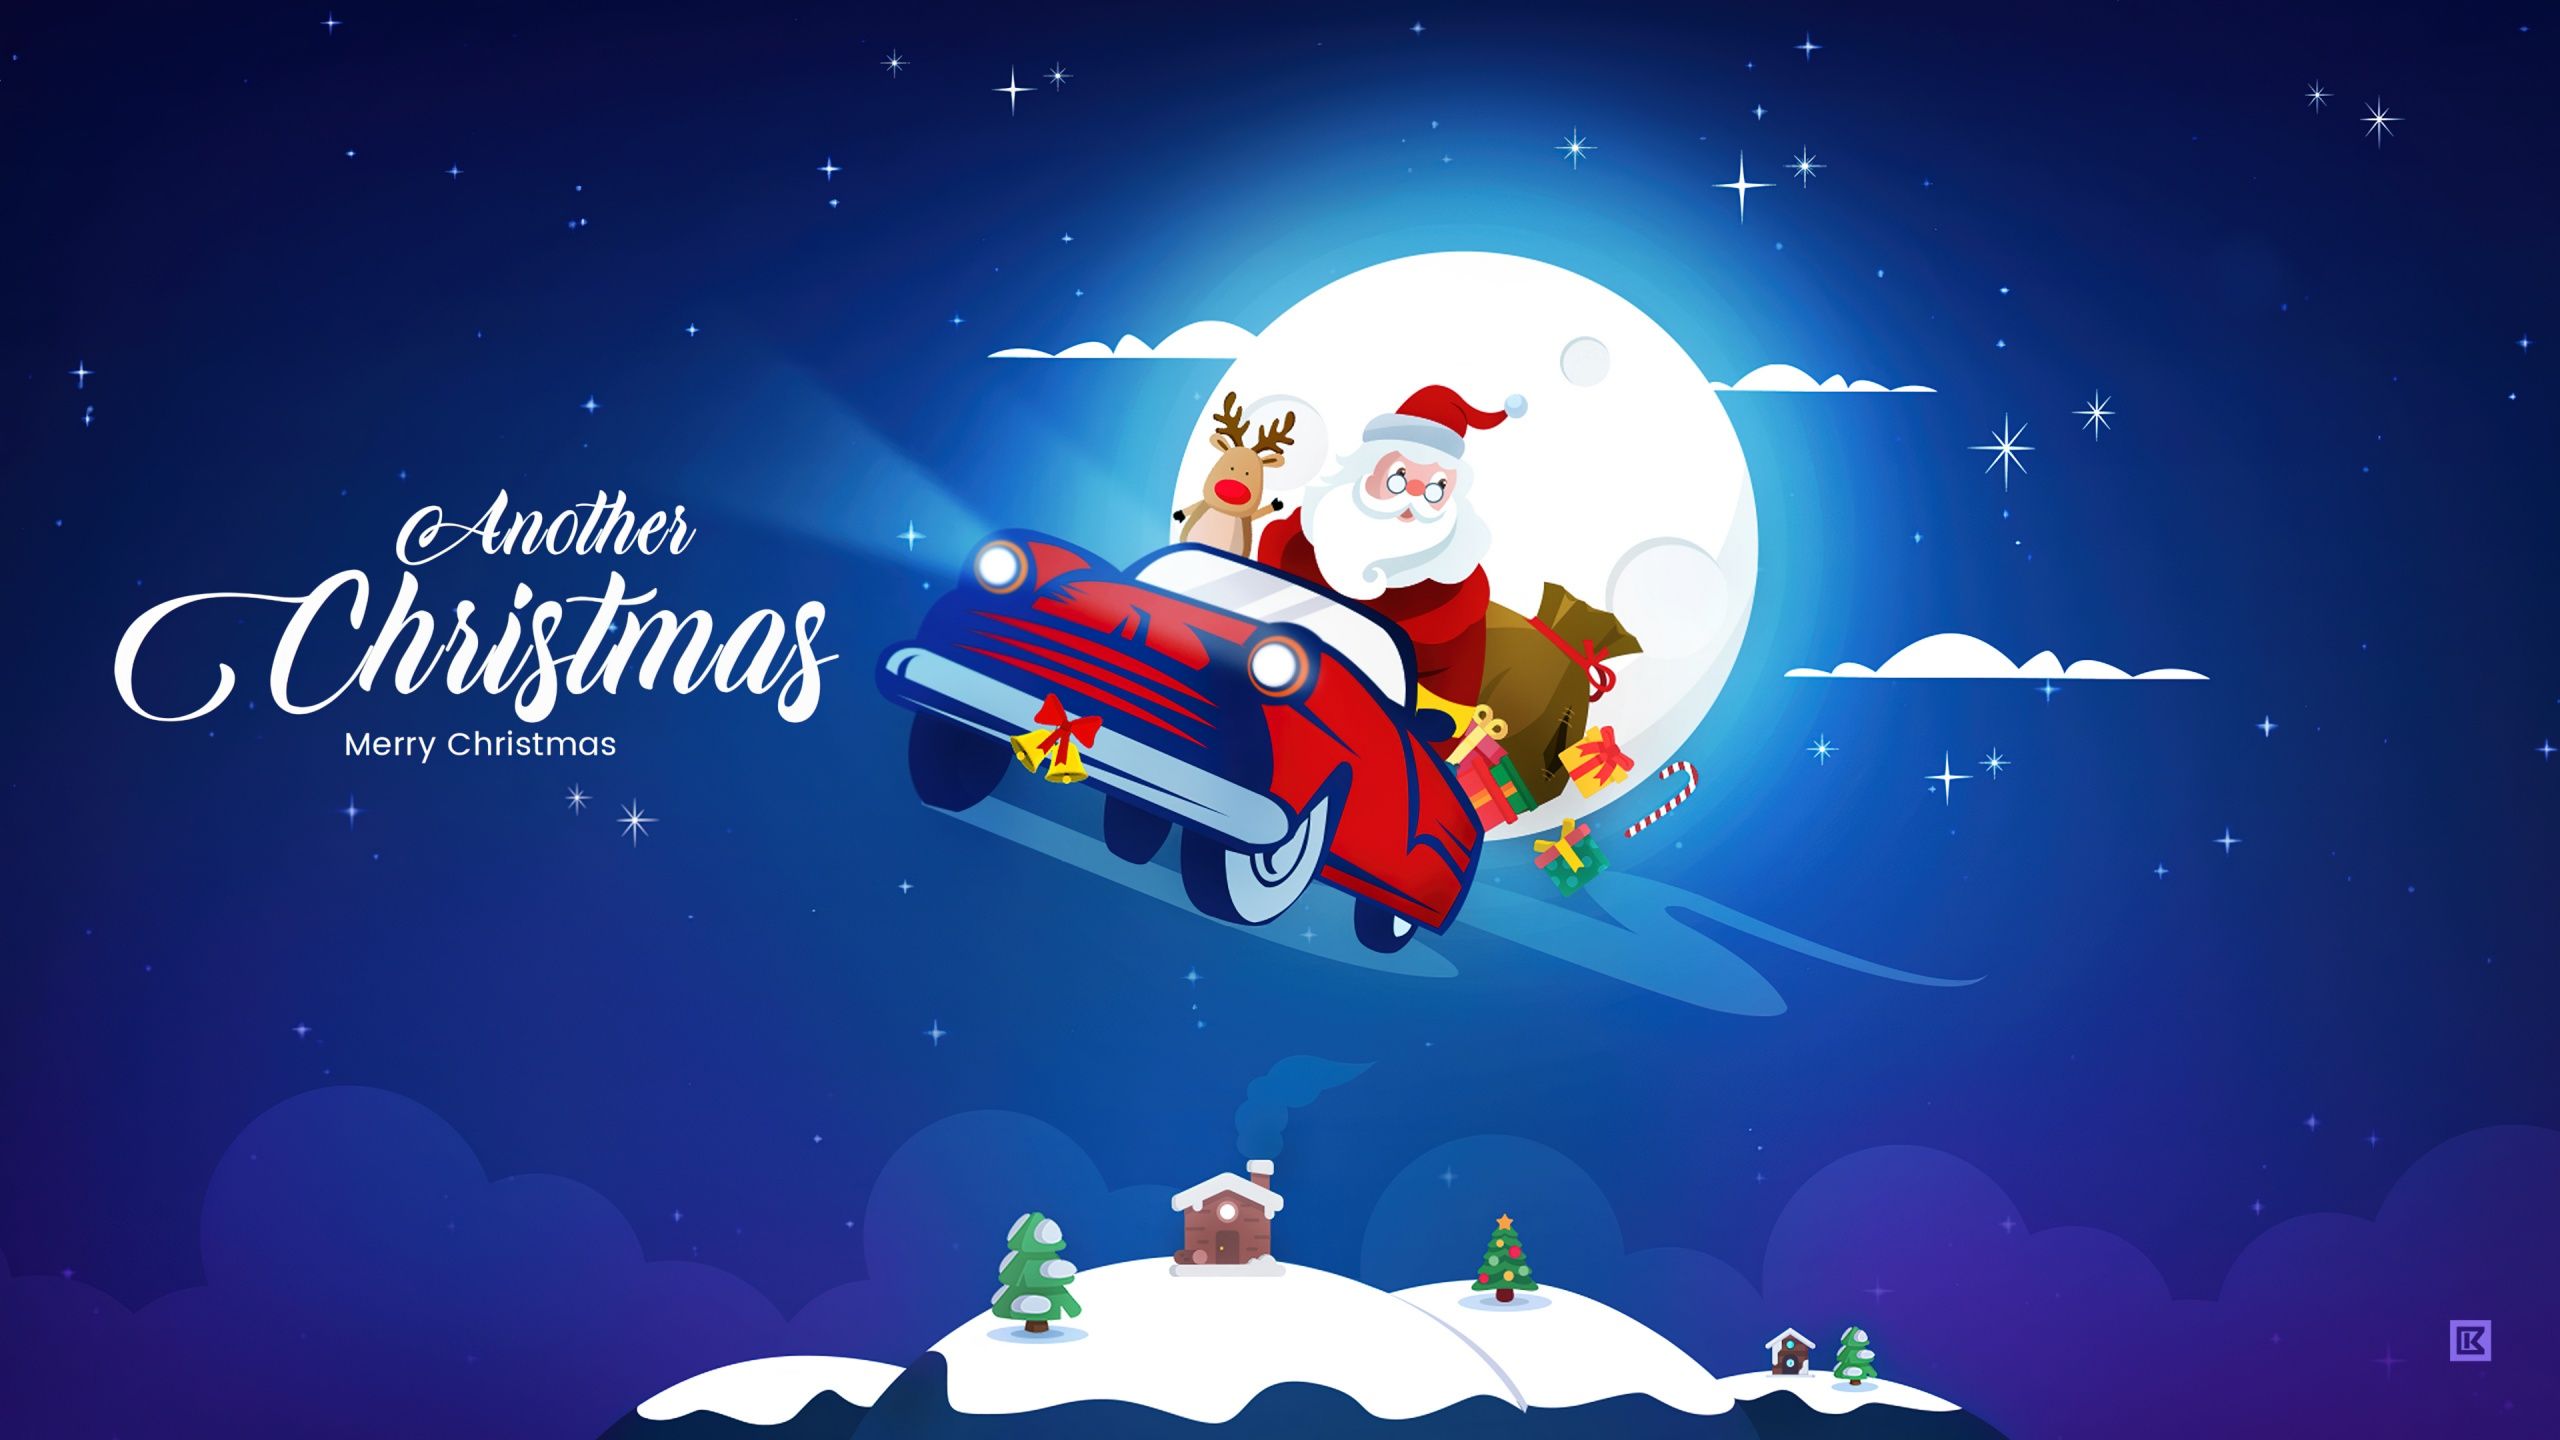 Merry Christmas HD Wallpapers - 4k, HD Merry Christmas Backgrounds on ...